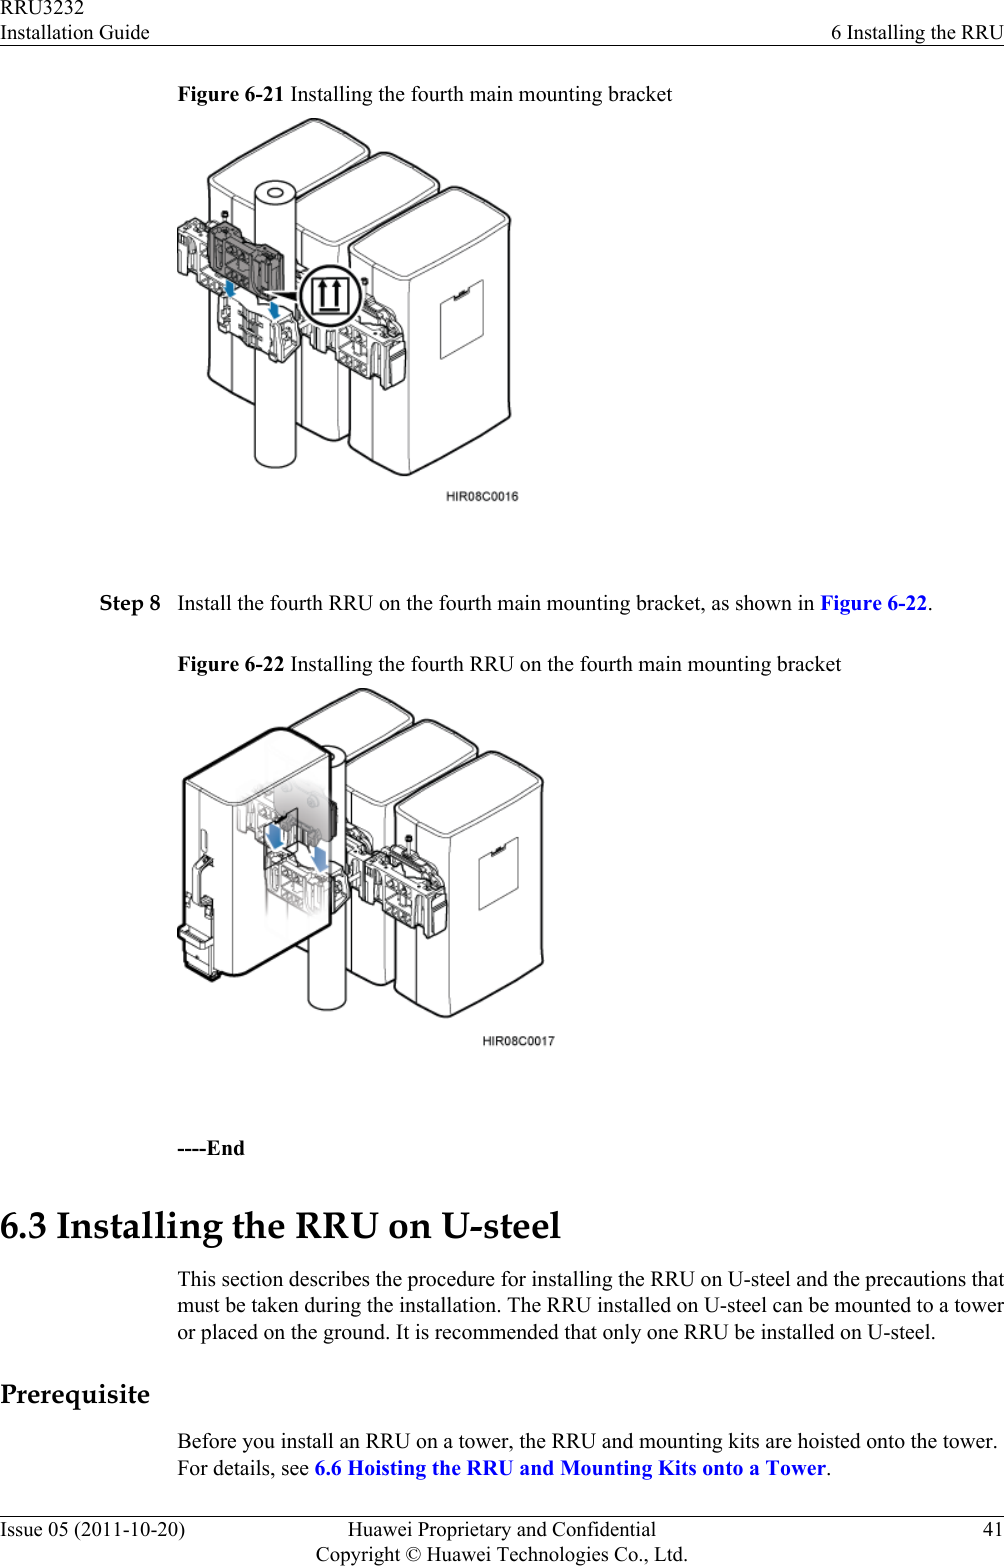 Figure 6-21 Installing the fourth main mounting bracket Step 8 Install the fourth RRU on the fourth main mounting bracket, as shown in Figure 6-22.Figure 6-22 Installing the fourth RRU on the fourth main mounting bracket ----End6.3 Installing the RRU on U-steelThis section describes the procedure for installing the RRU on U-steel and the precautions thatmust be taken during the installation. The RRU installed on U-steel can be mounted to a toweror placed on the ground. It is recommended that only one RRU be installed on U-steel.PrerequisiteBefore you install an RRU on a tower, the RRU and mounting kits are hoisted onto the tower.For details, see 6.6 Hoisting the RRU and Mounting Kits onto a Tower.RRU3232Installation Guide 6 Installing the RRUIssue 05 (2011-10-20) Huawei Proprietary and ConfidentialCopyright © Huawei Technologies Co., Ltd.41